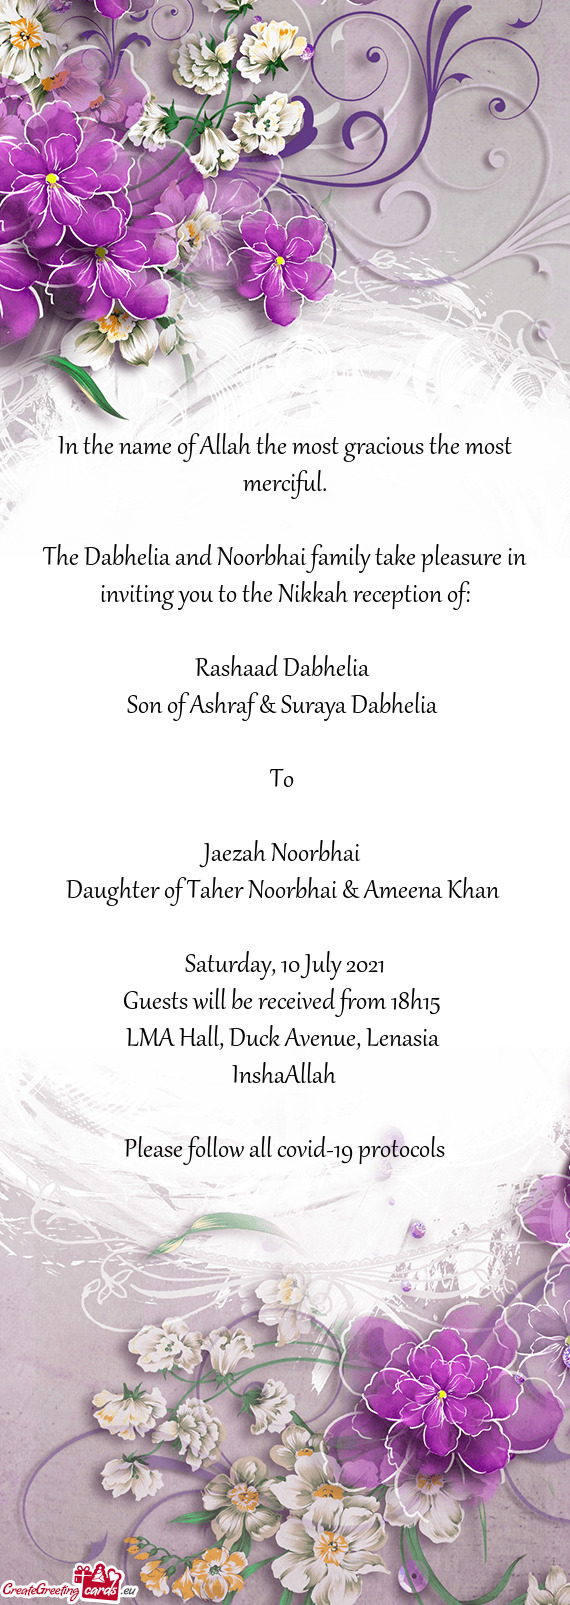 The Dabhelia and Noorbhai family take pleasure in inviting you to the Nikkah reception of: